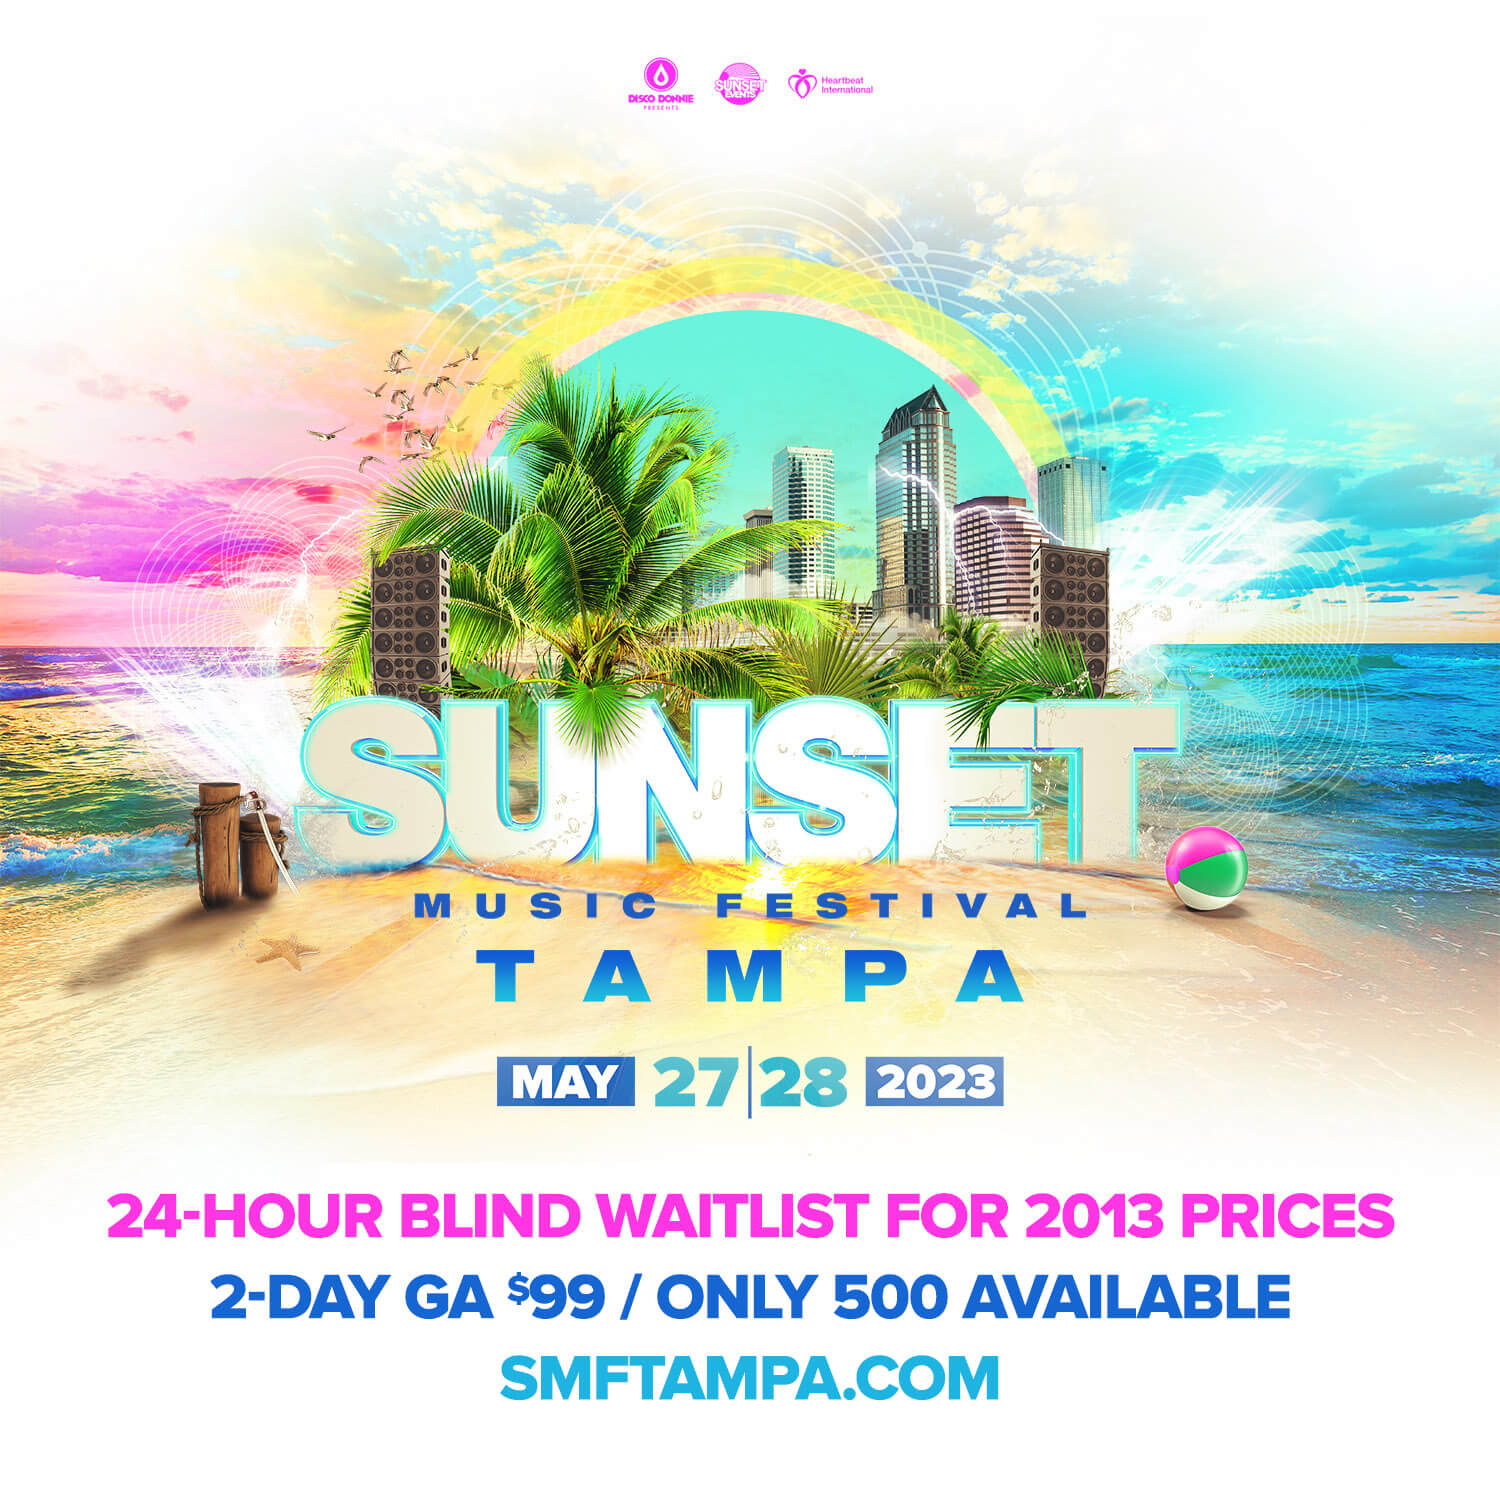 SMF Tickets Promo Code, SMF Festival, Sunset Music Festival, 2023, Discount Tickets, Tampa Florida, Lineup, GA, May, Saturday, Sunday